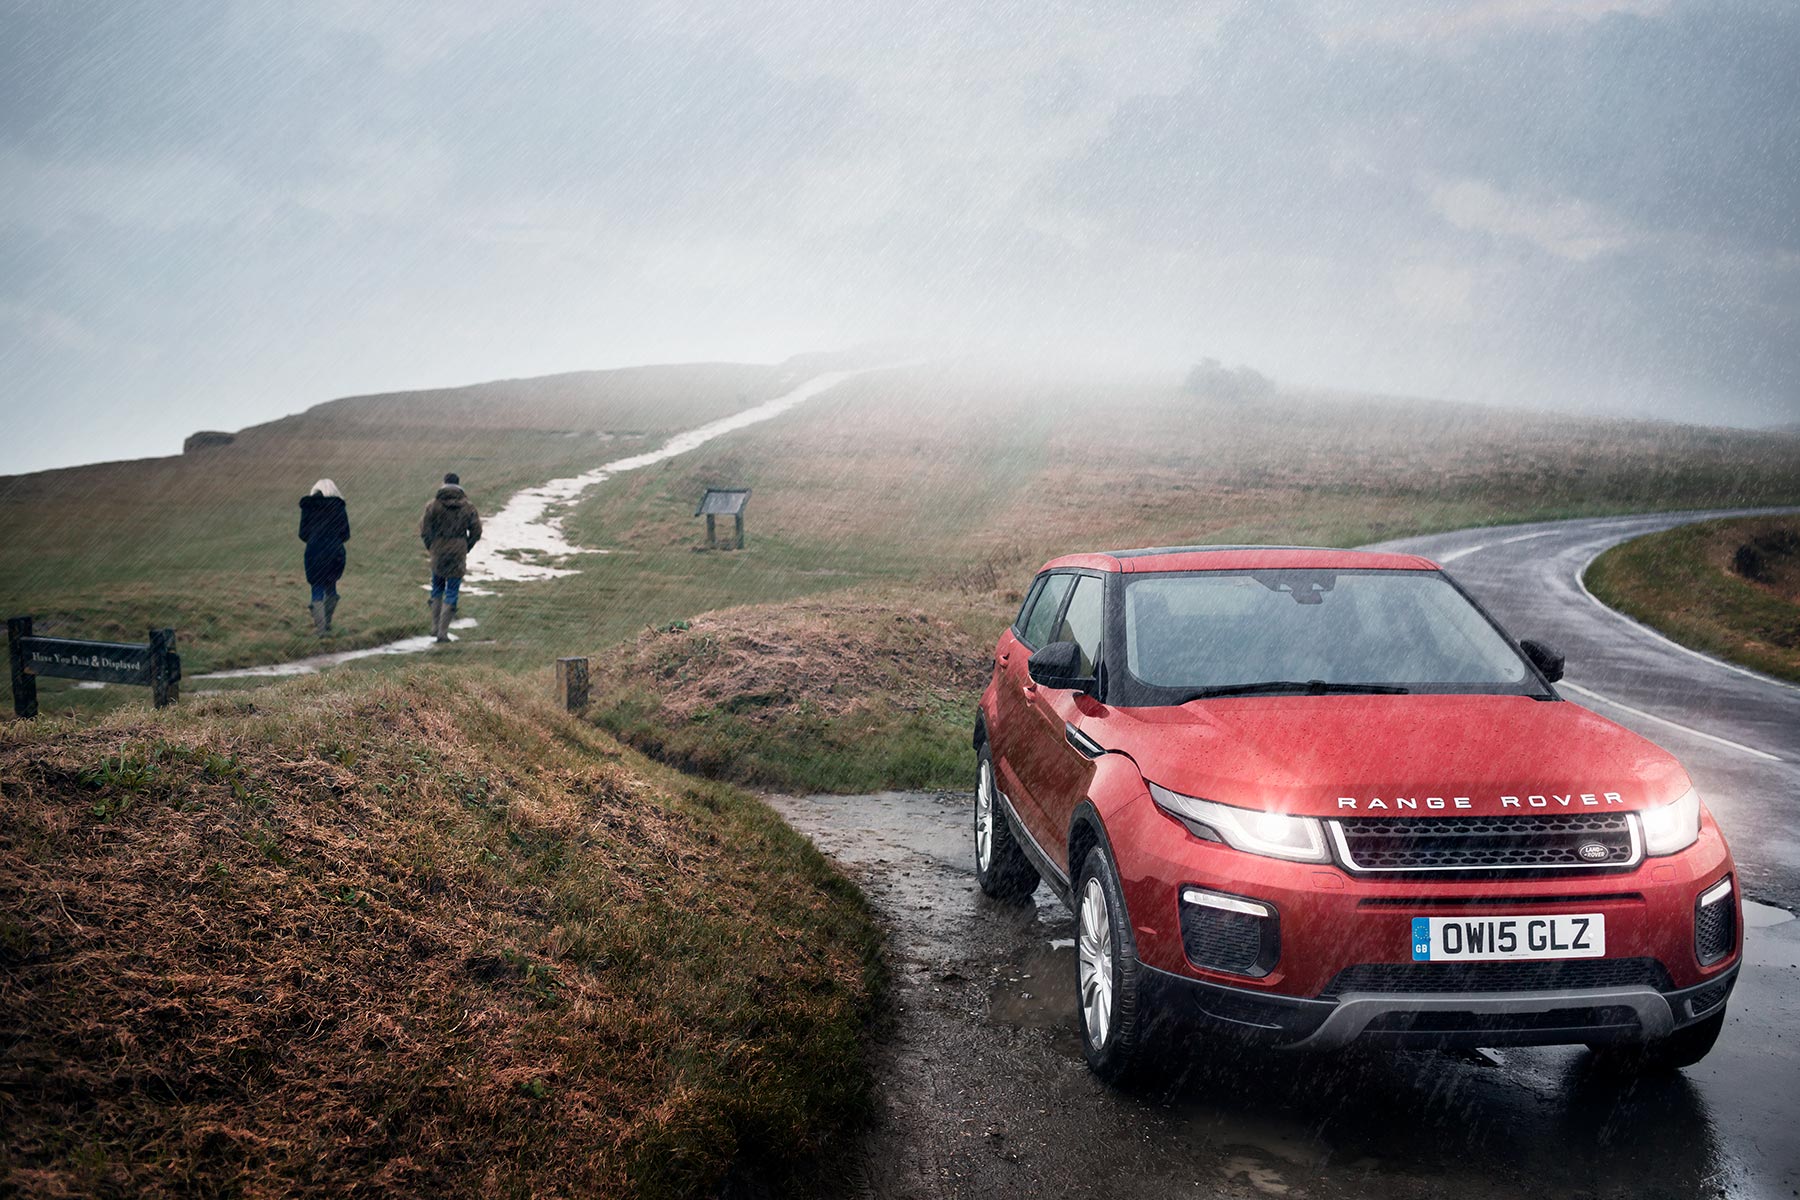 A Range Rover parked on a moor. Commercial photographer Richard Boll, London.